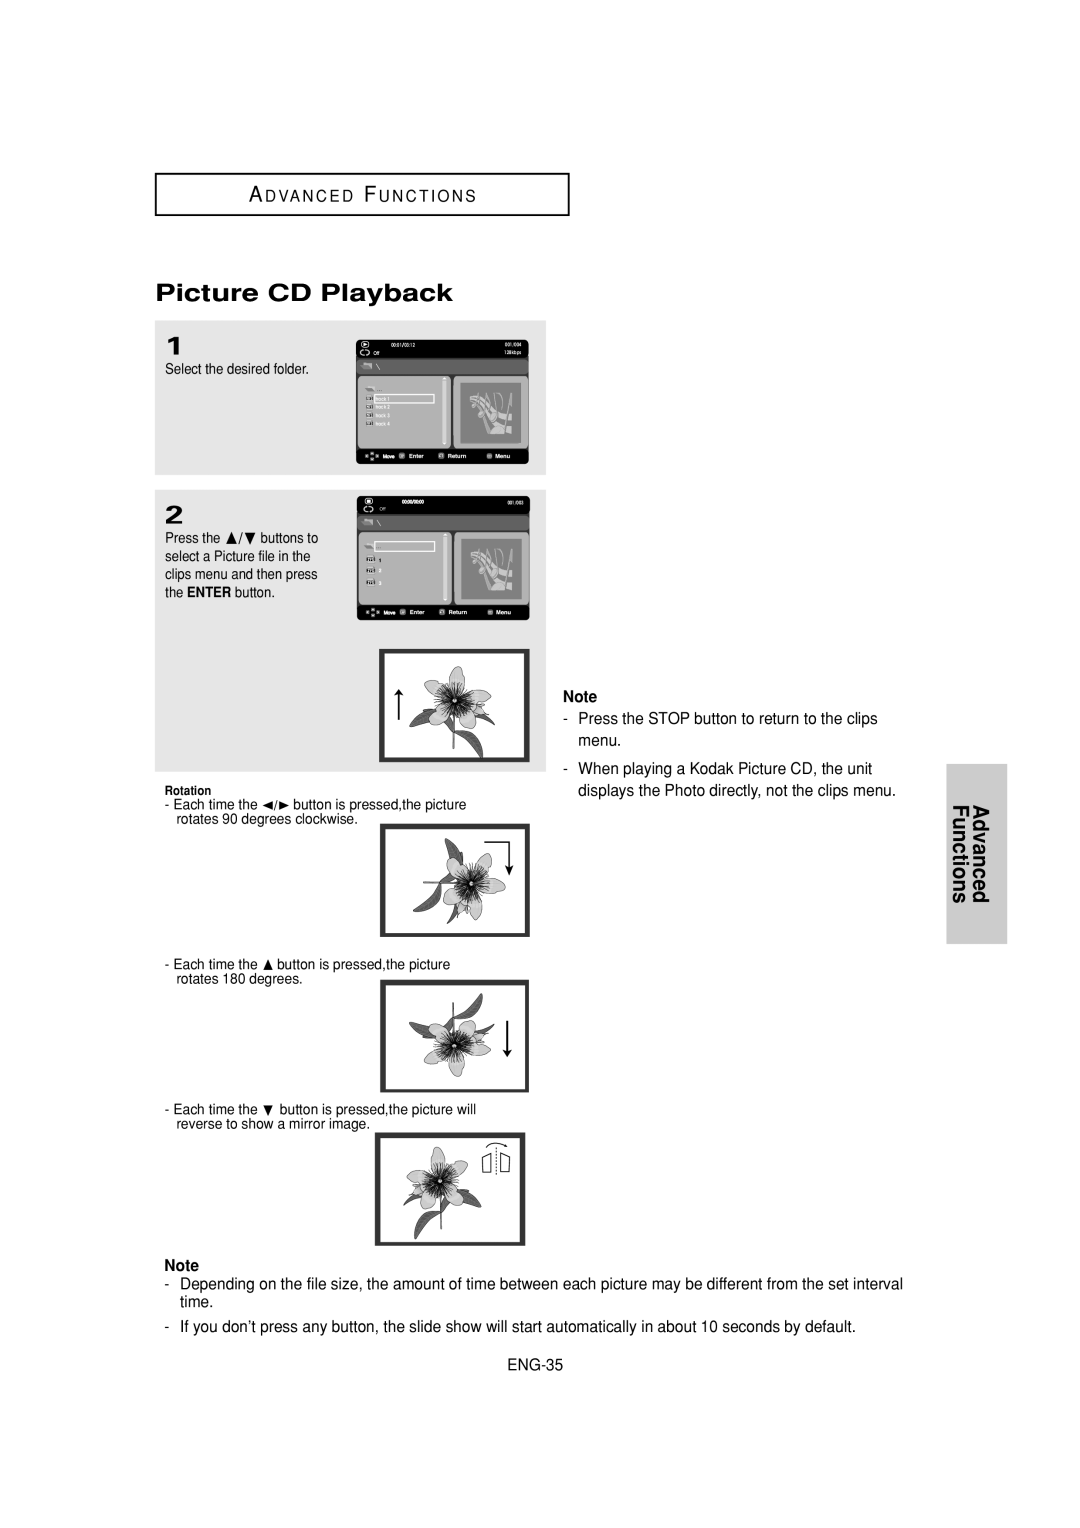 Samsung DVD-P181 manual Picture CD Playback 